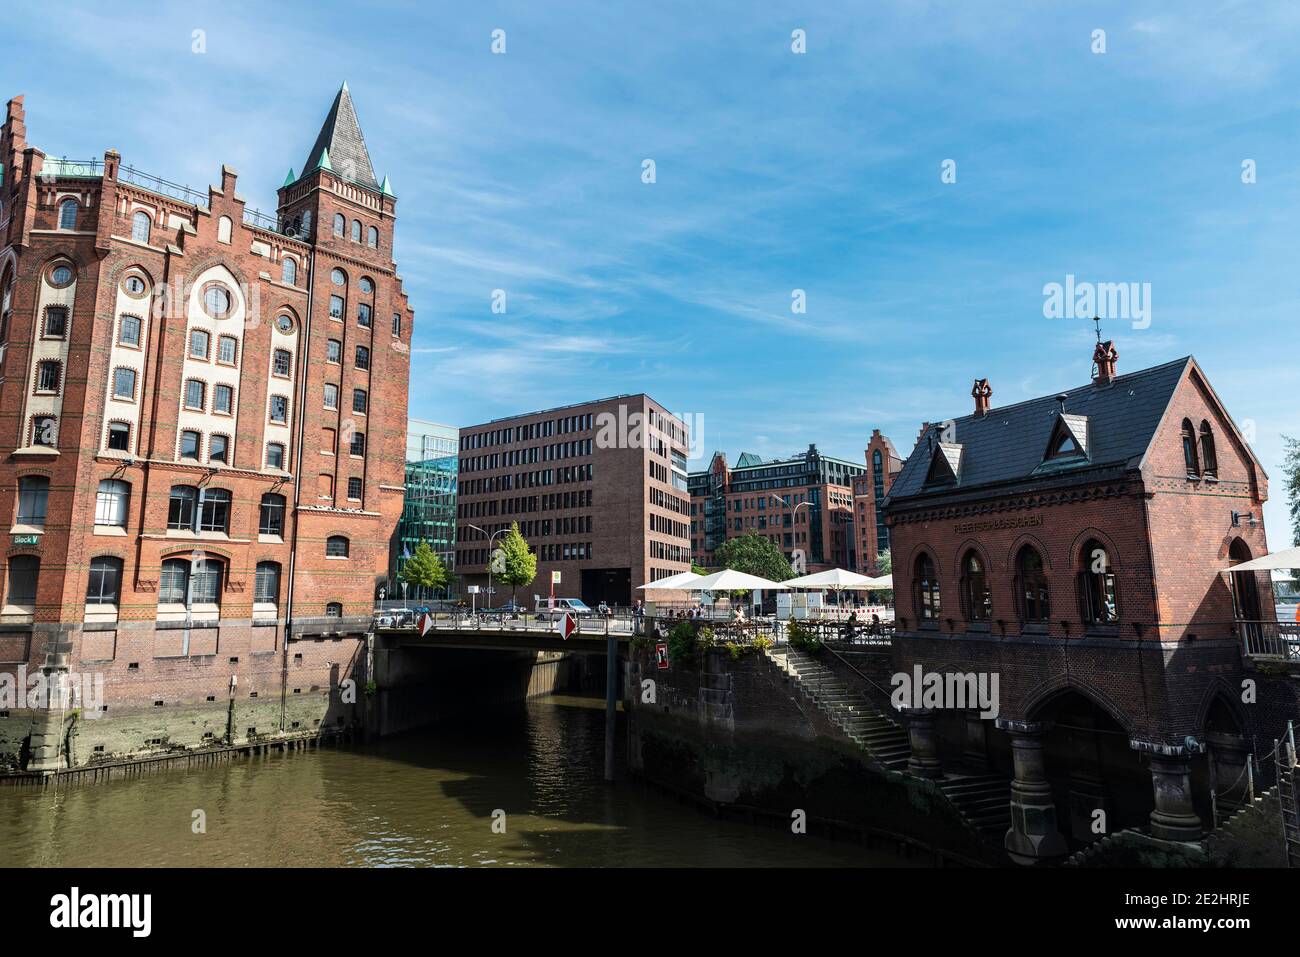 Hamburg, Germany - August 23, 2019: Old warehouses converted into offices and flats next to a canal with people around in HafenCity, Hamburg, Germany Stock Photo